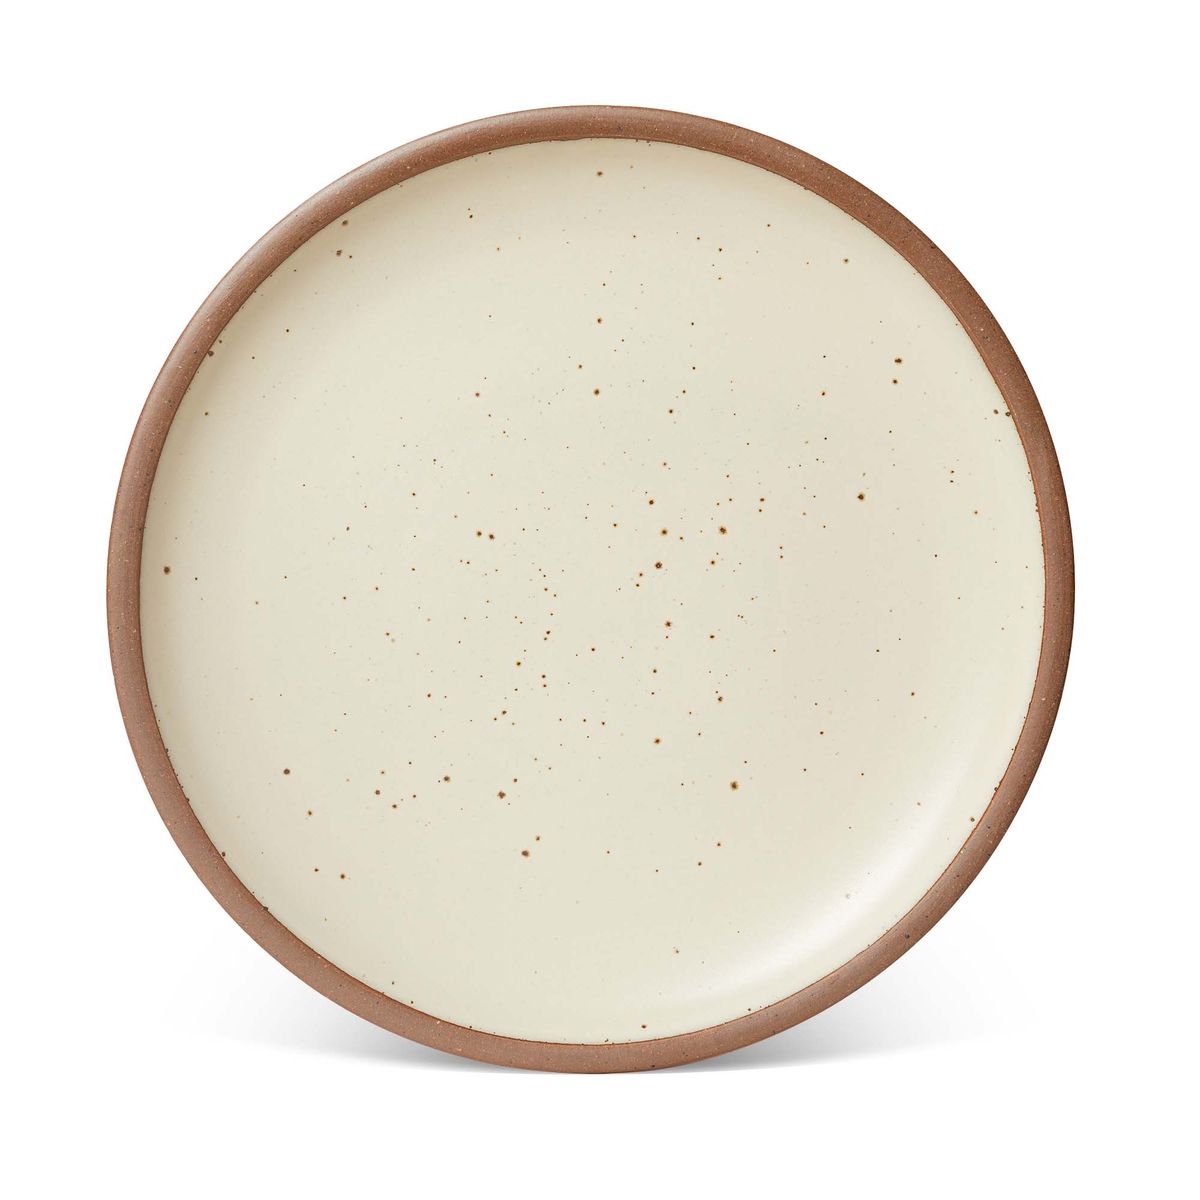 A large ceramic platter in a warm, tan-toned, off-white color featuring iron speckles and an unglazed rim